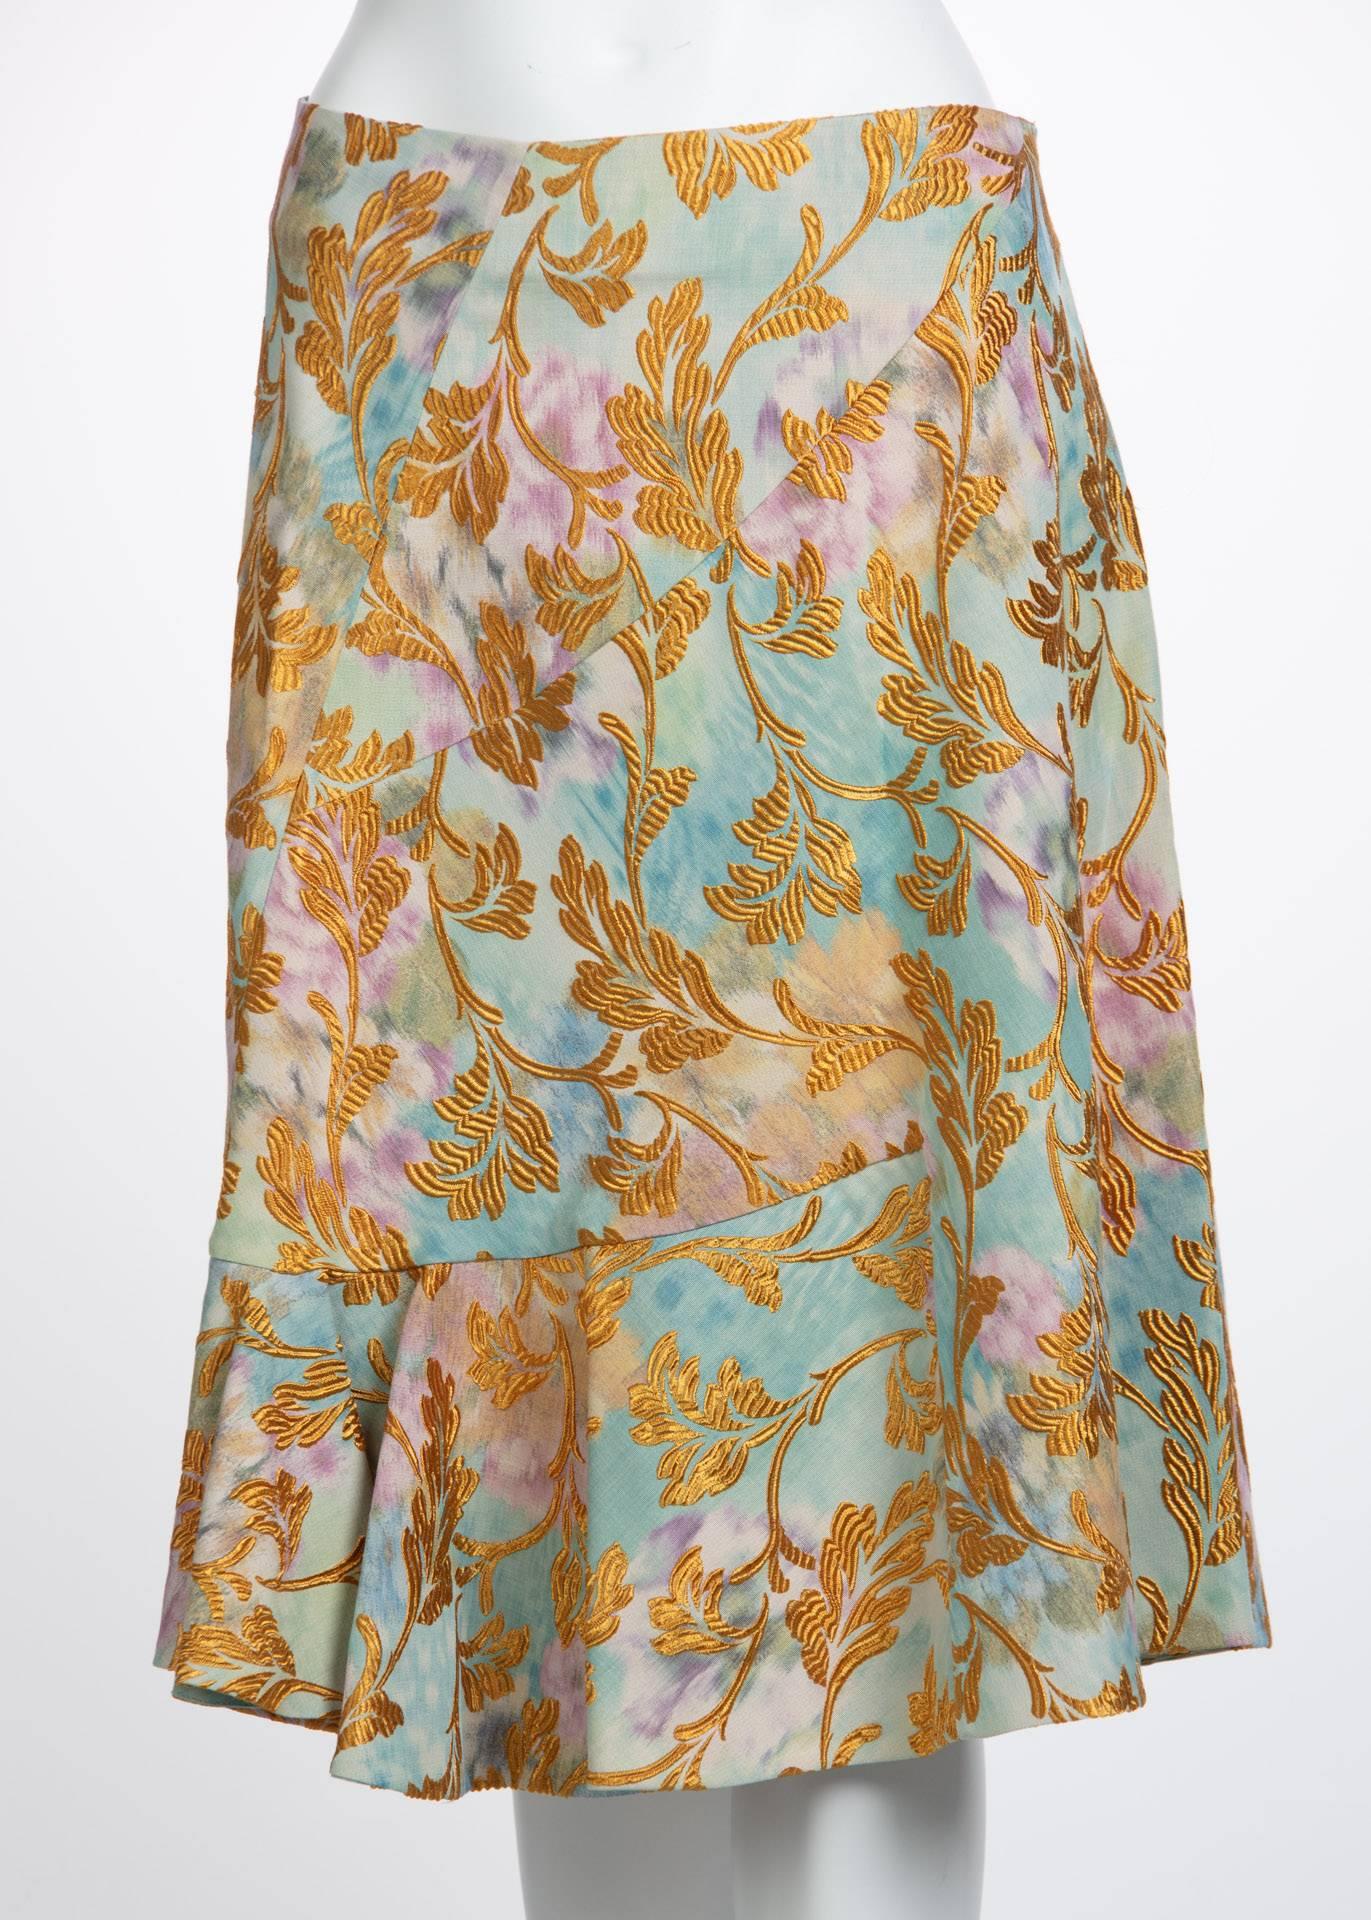 2000s Marni Gold Leaf Turquoise Lilac Watercolor Brocade Gold Top & Skirt Set In Excellent Condition For Sale In Boca Raton, FL